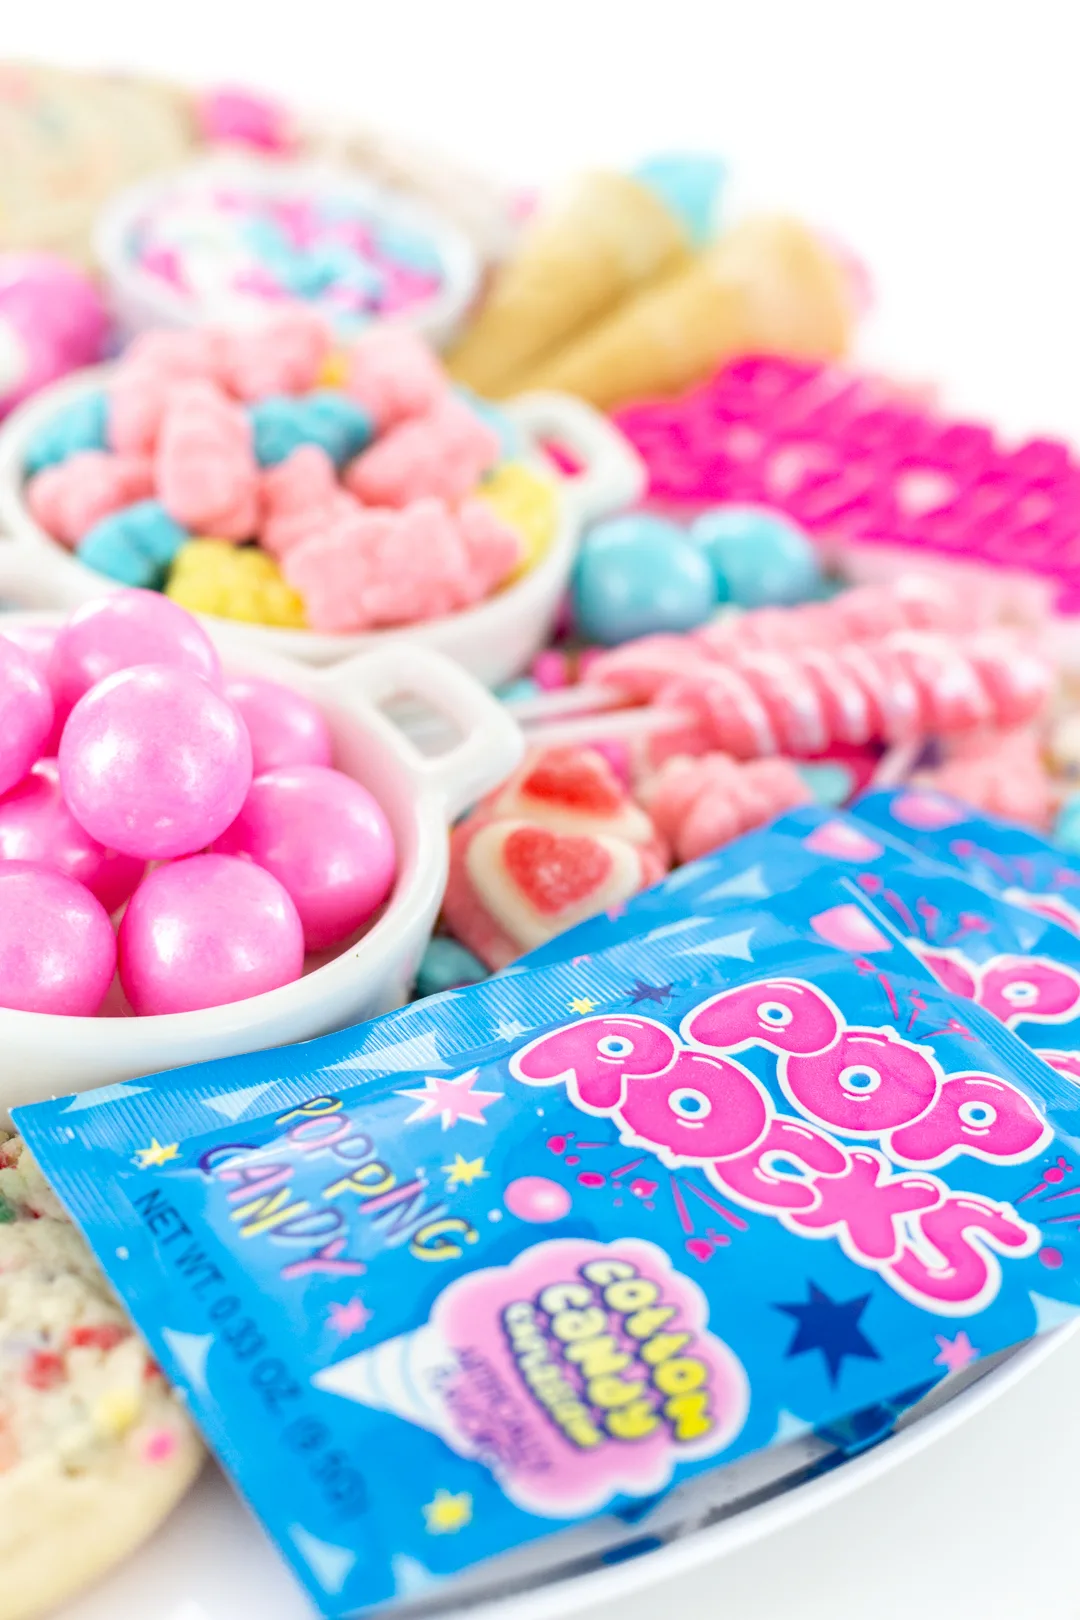 Pop Rocks and other pink and blue themed candies and treats.